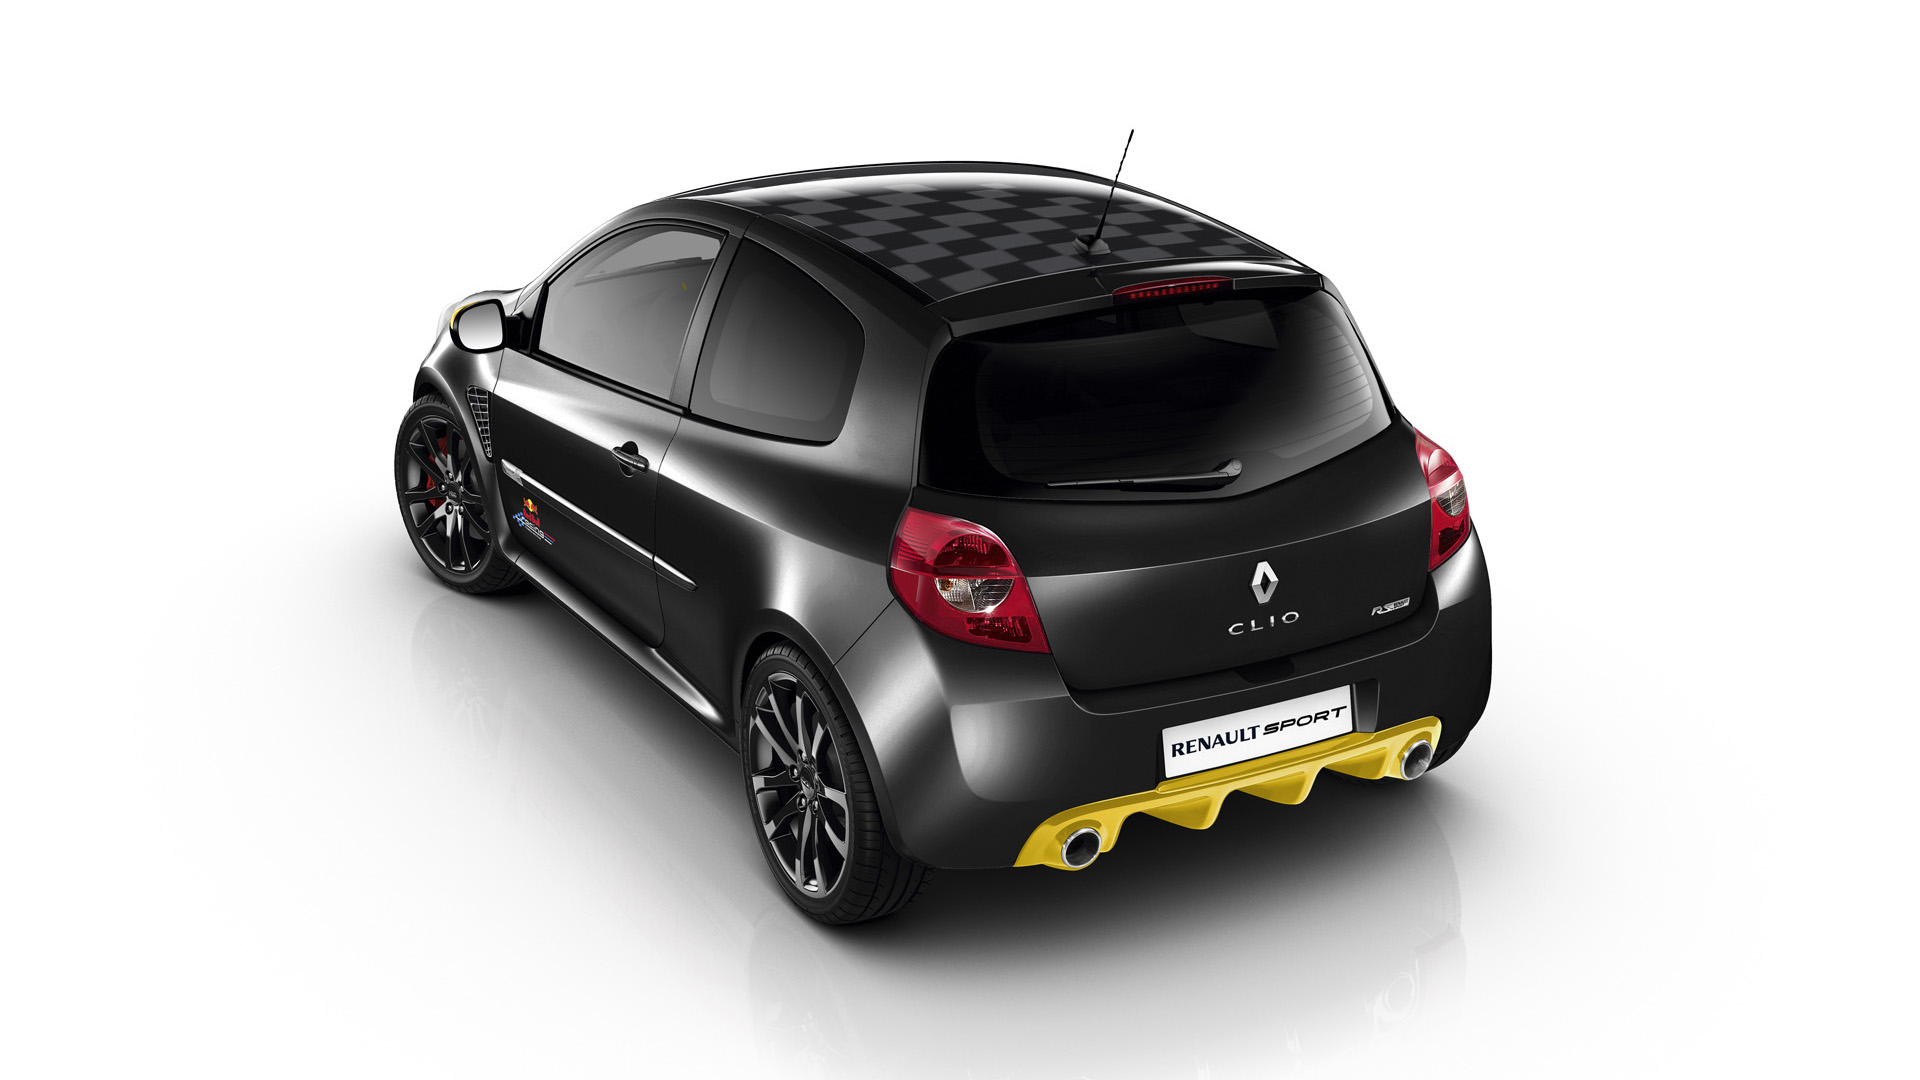  2012 Renault Clio RS Red Bull Racing RB7 Wallpaper.